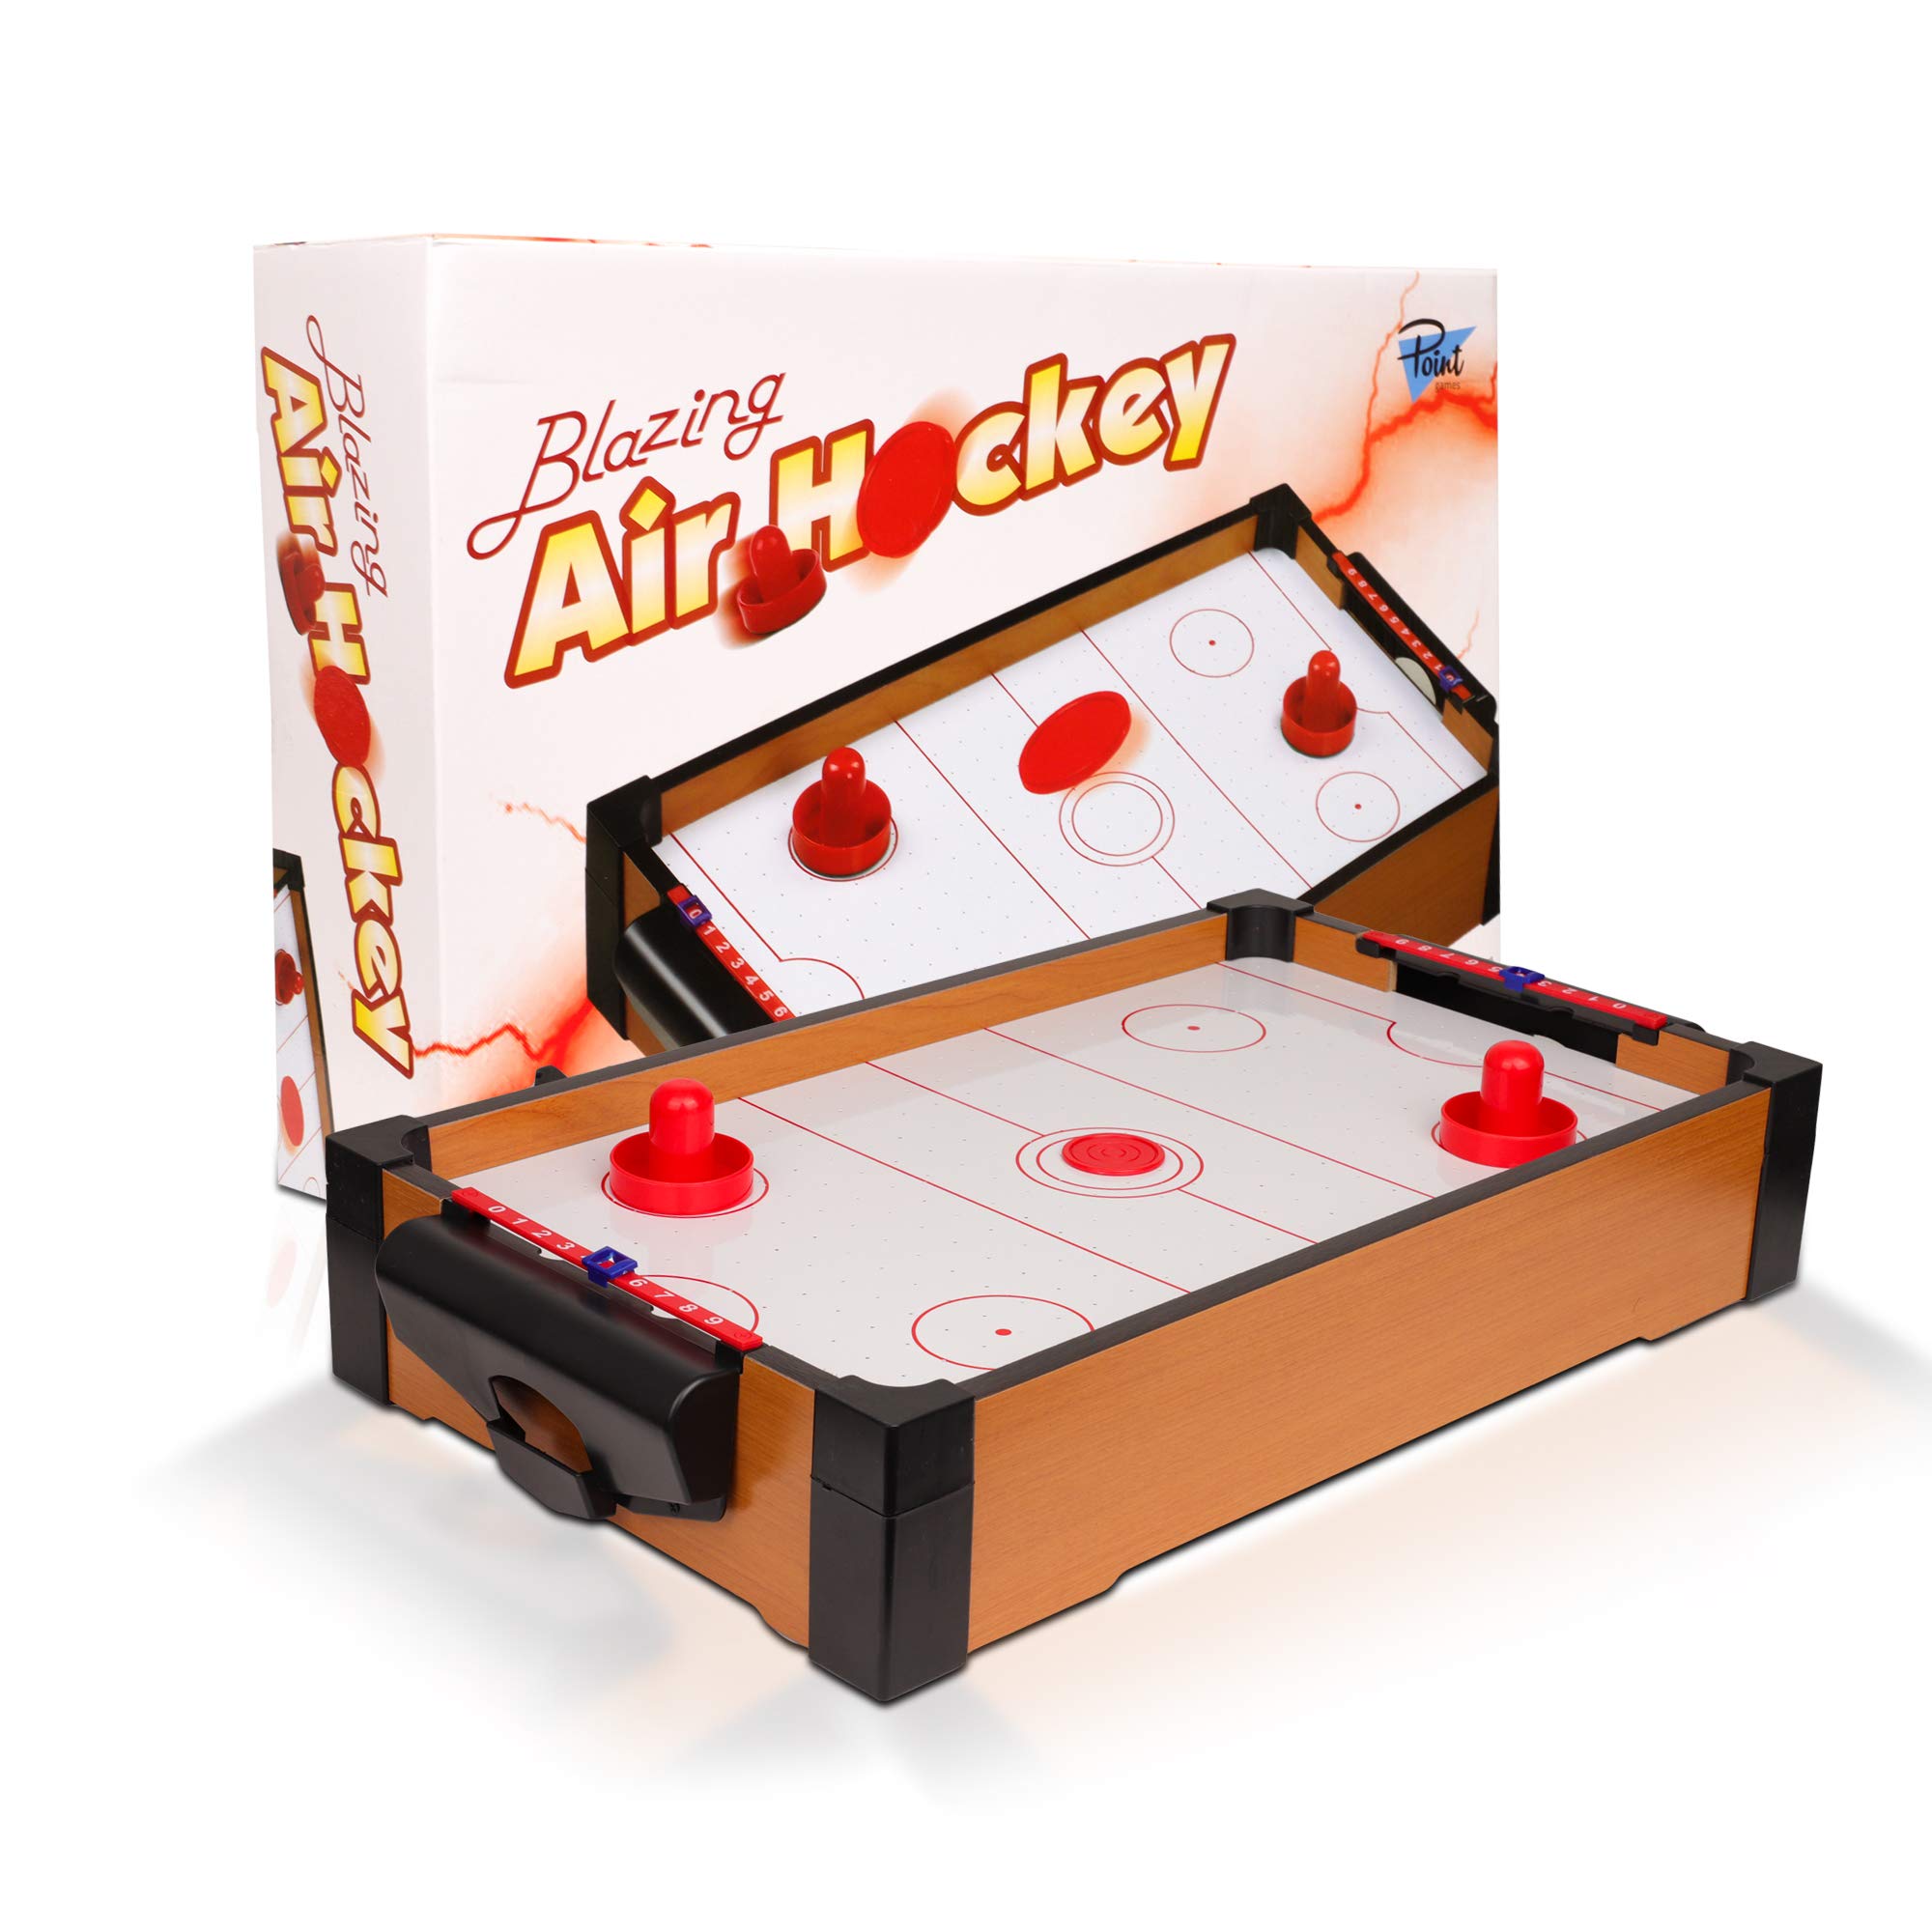 Point Games Mini Air Hockey Table for Kids - Hockey Table Game - Arcade & Table Games - Air Hockey Pucks and Paddles - Portable Sport Hockey for Boys and Girls - image 1 of 6